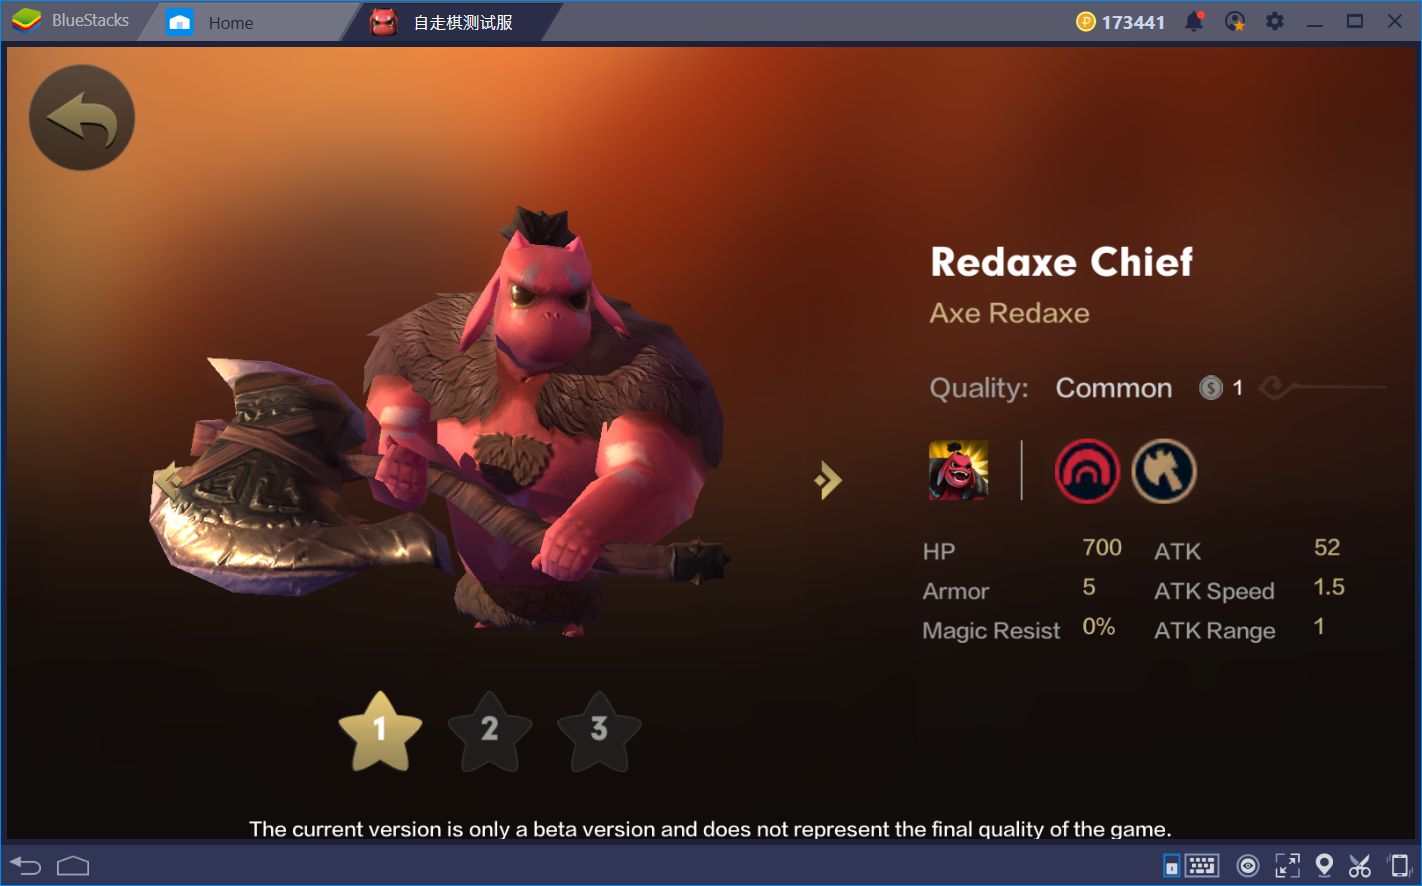 Dota Auto Chess: Guide on the 5 Gold hero units